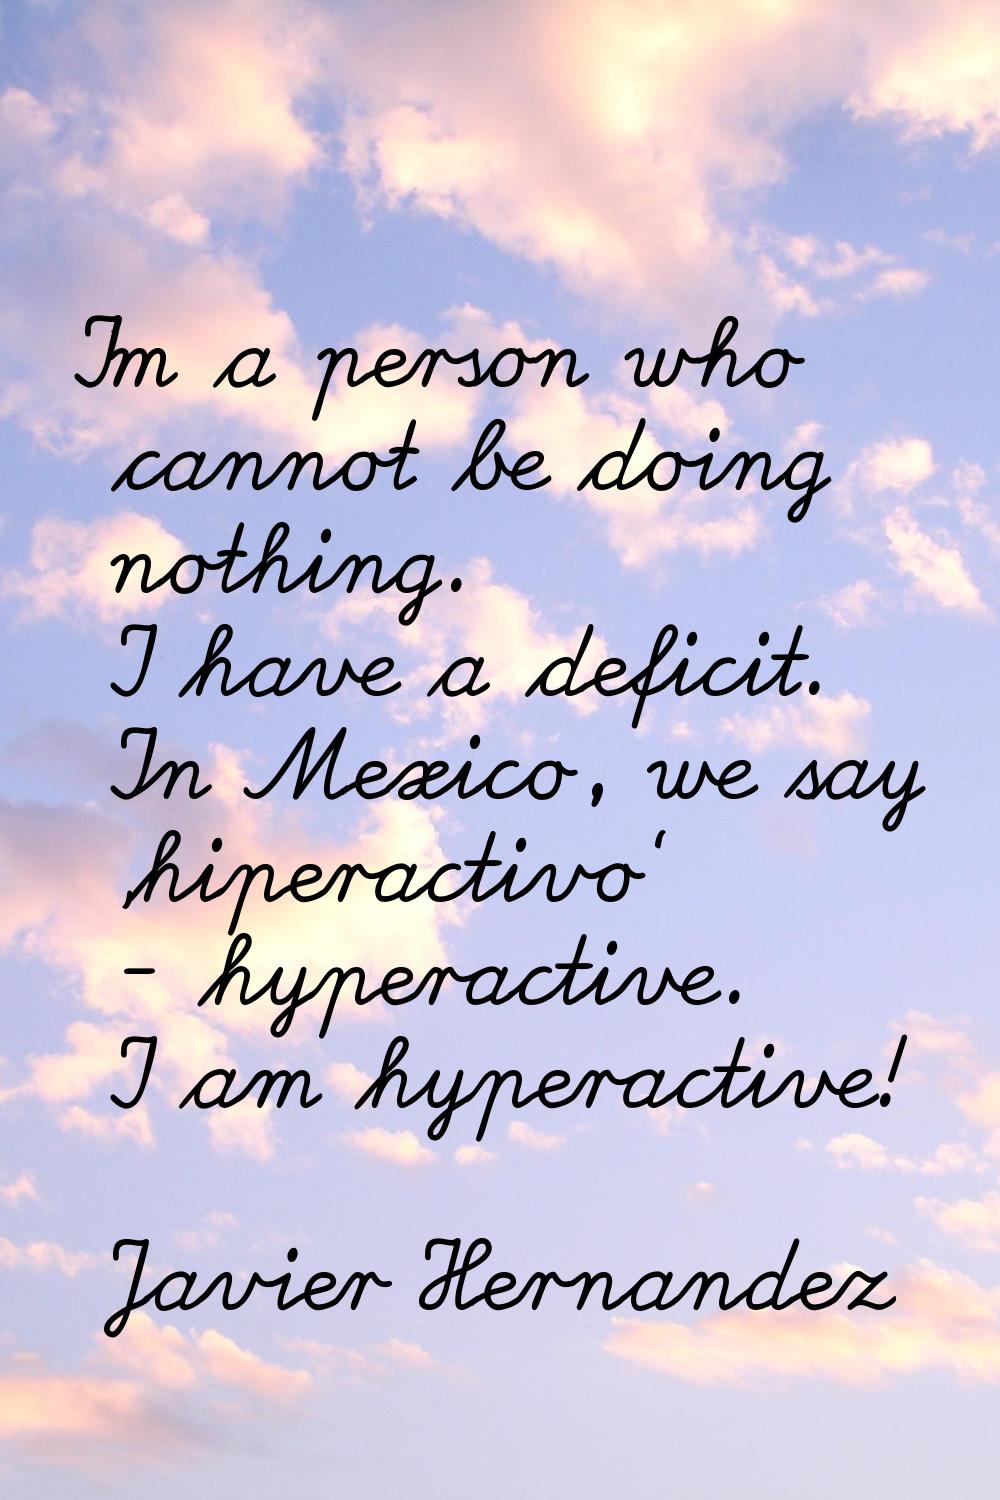 I'm a person who cannot be doing nothing. I have a deficit. In Mexico, we say 'hiperactivo' - hyper